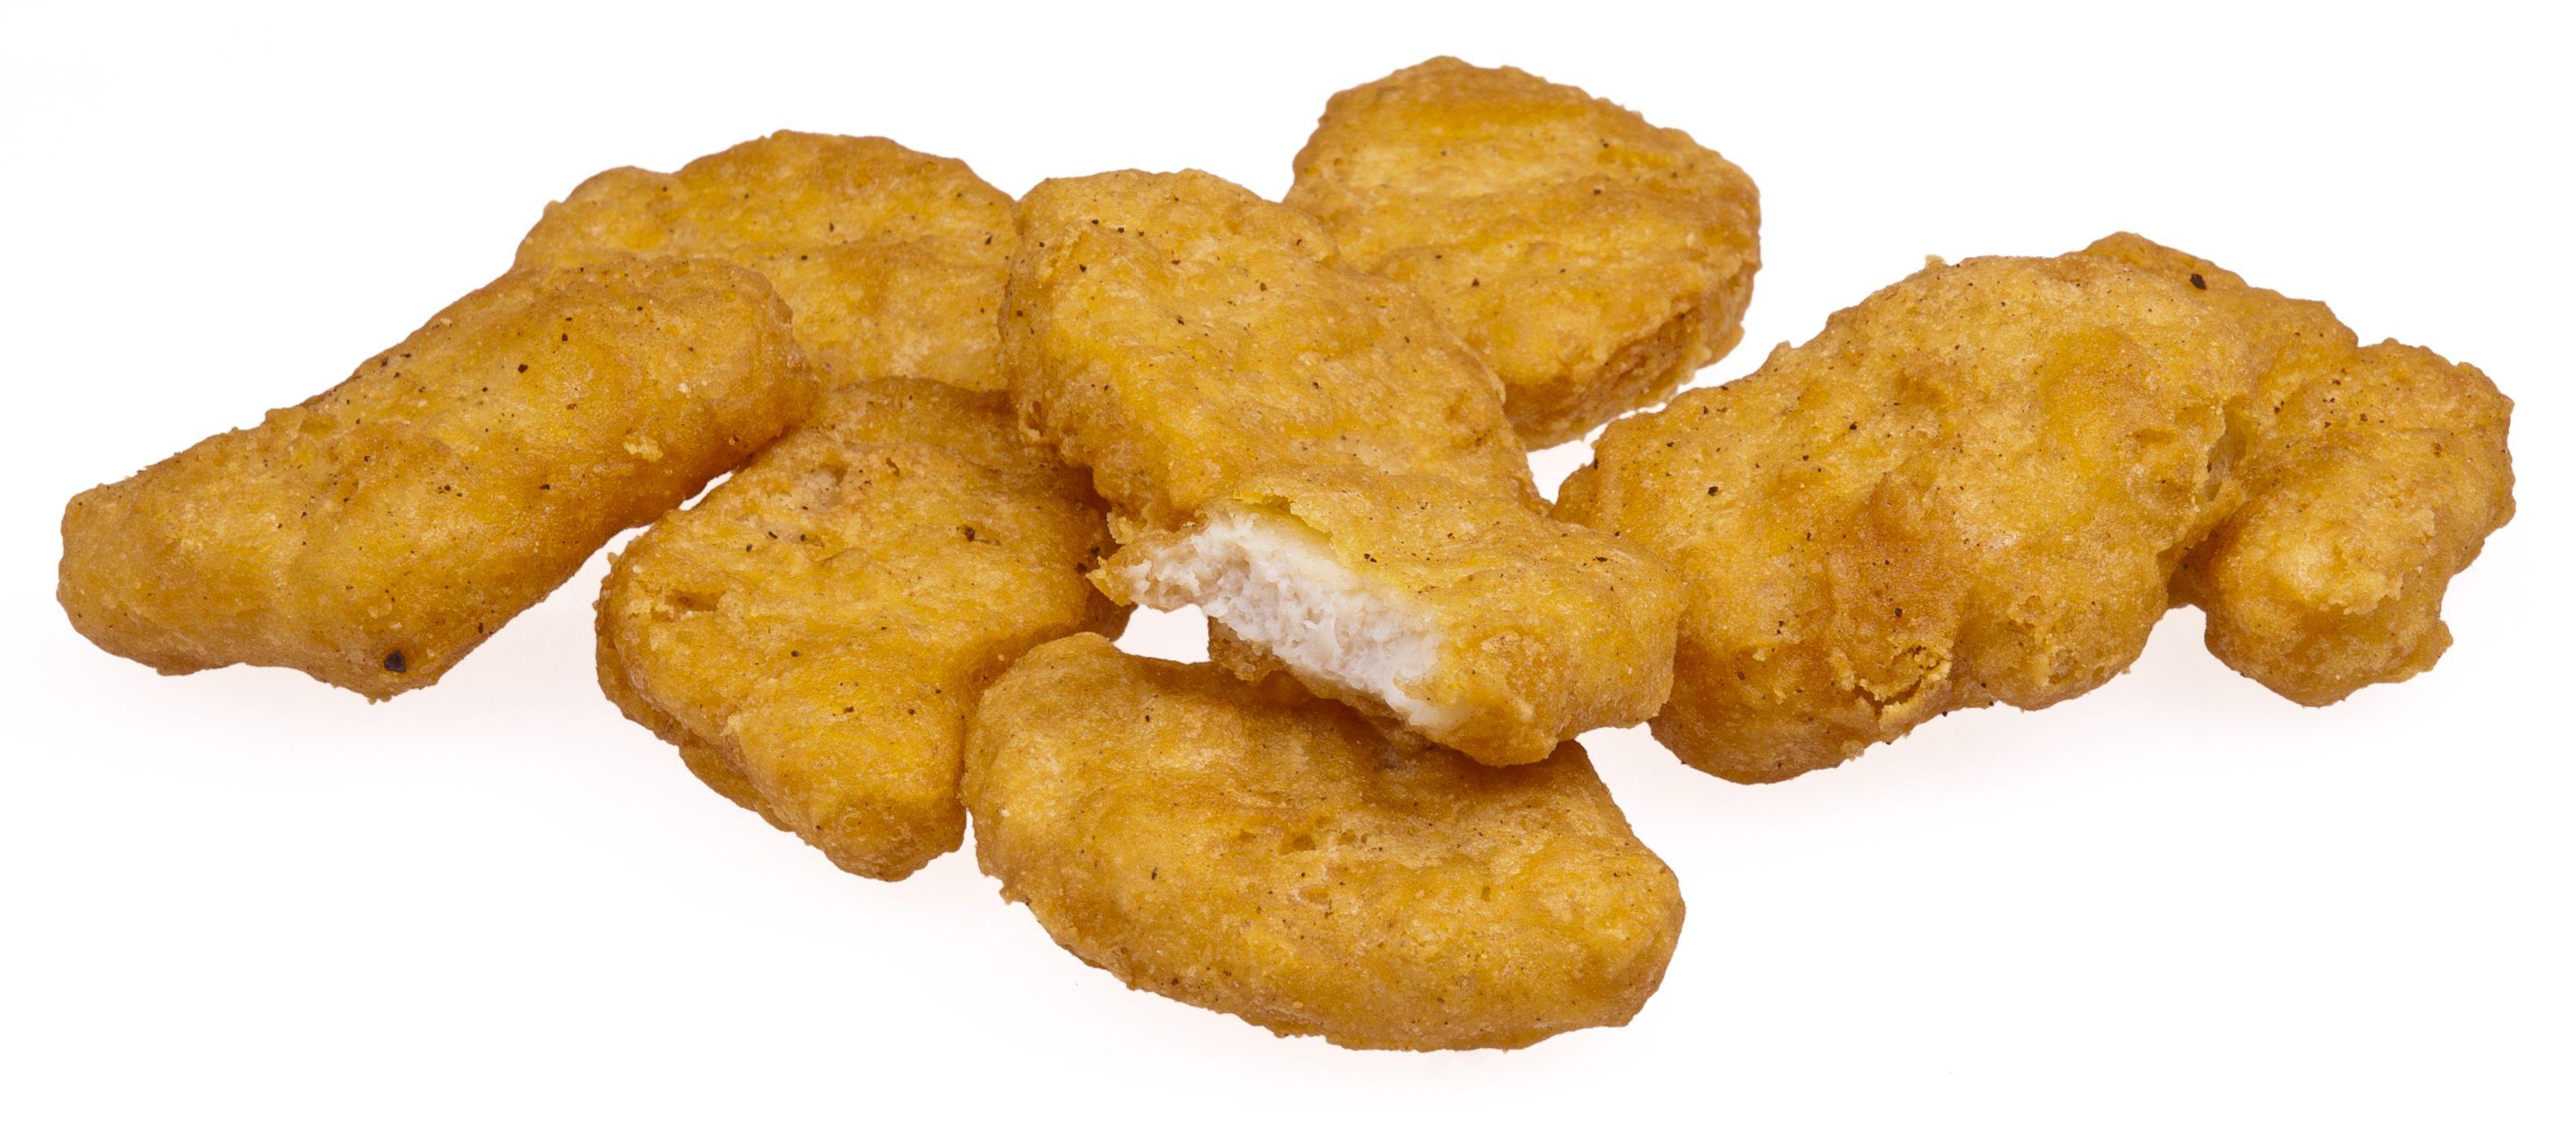 Download A Pile Of Fried Chicken Nuggets On A White Surface Wallpaper   Wallpaperscom